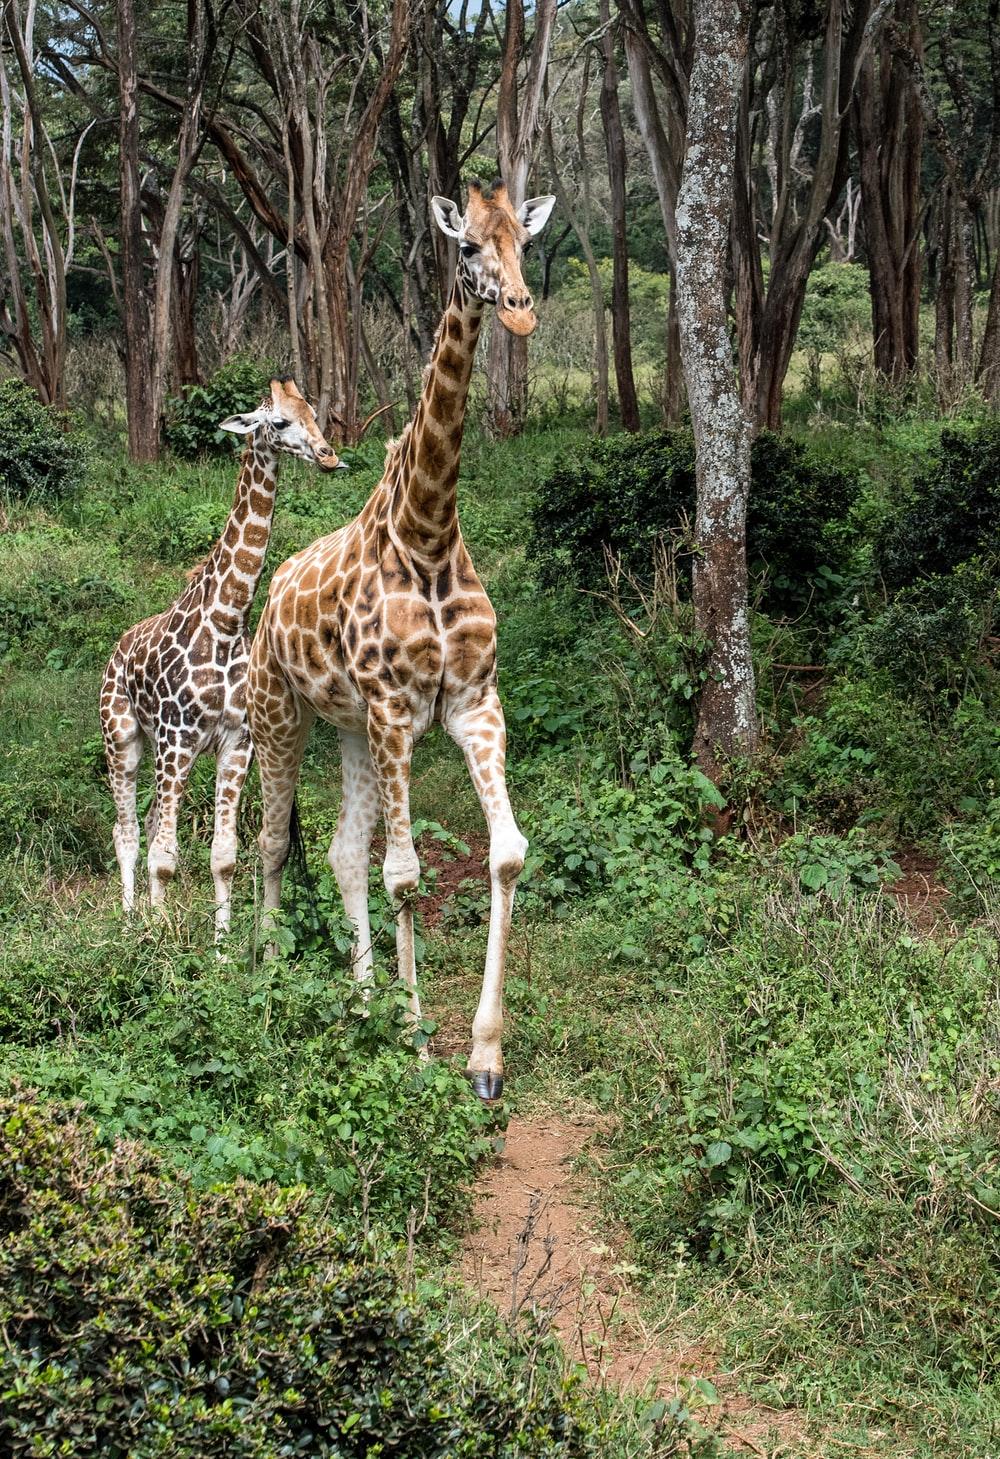 Baby Giraffe Picture. Download Free Image